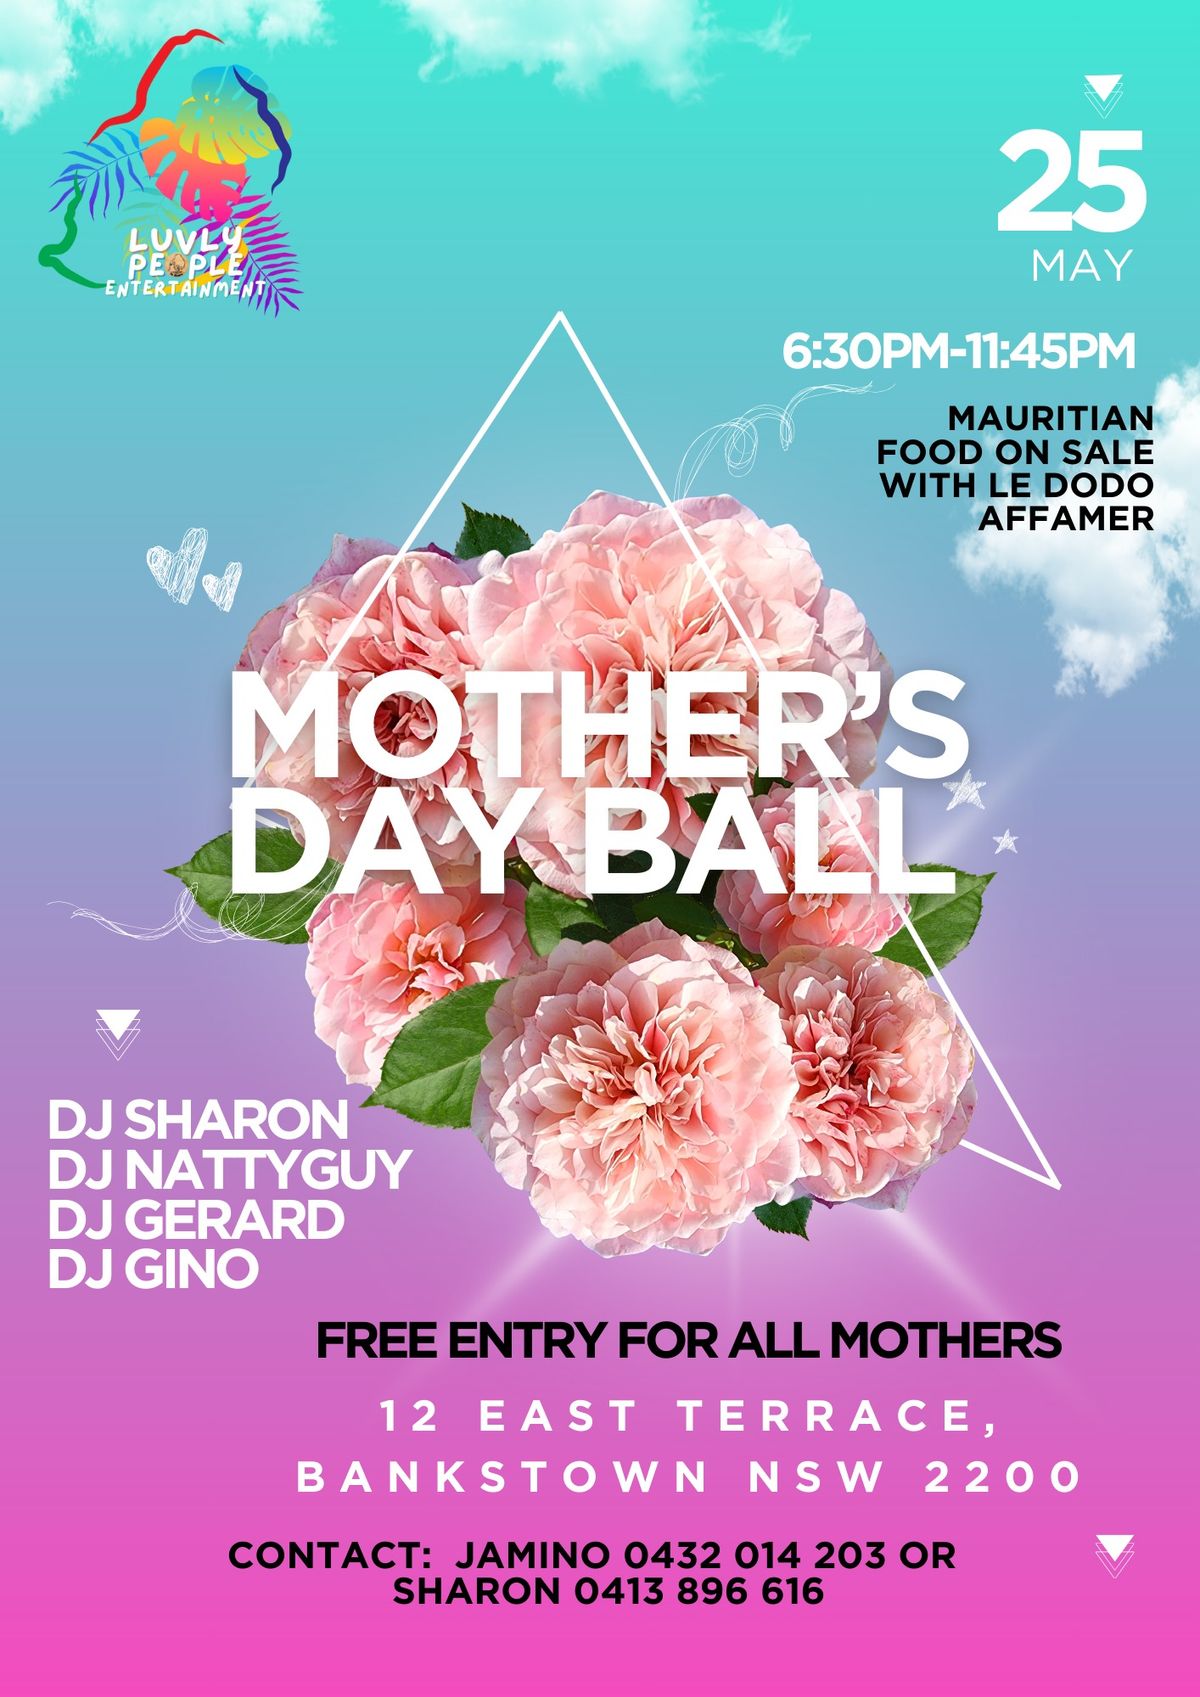 MOTHERS DAY BALL